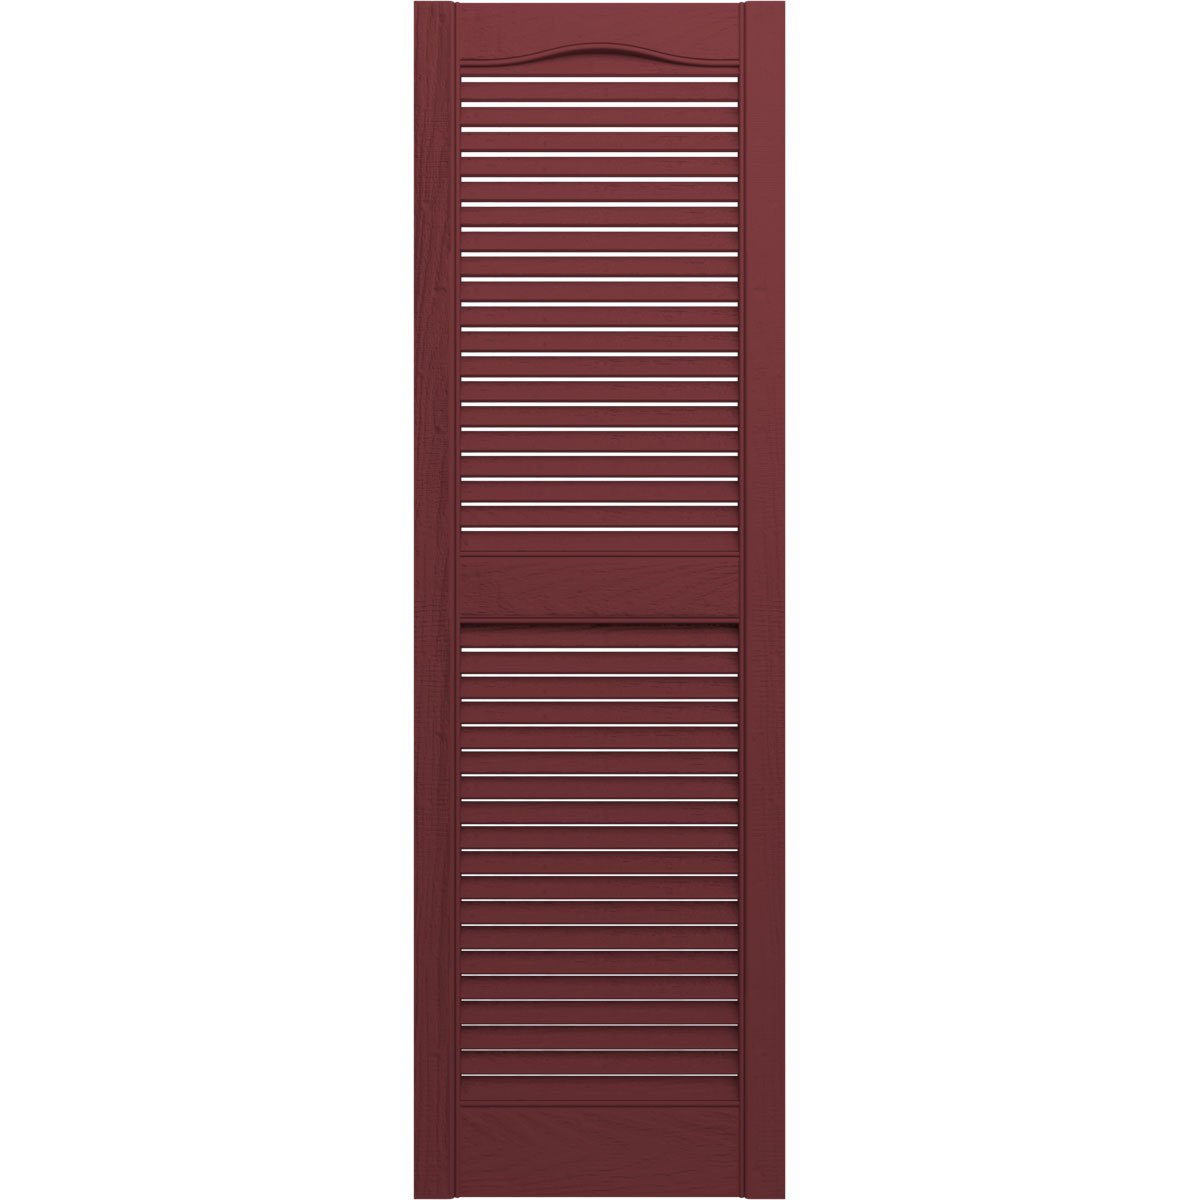 Mid America Cathedral Open Louver Vinyl Standard Shutter 1 Pair 14.5 x 43 036 Classic Blue